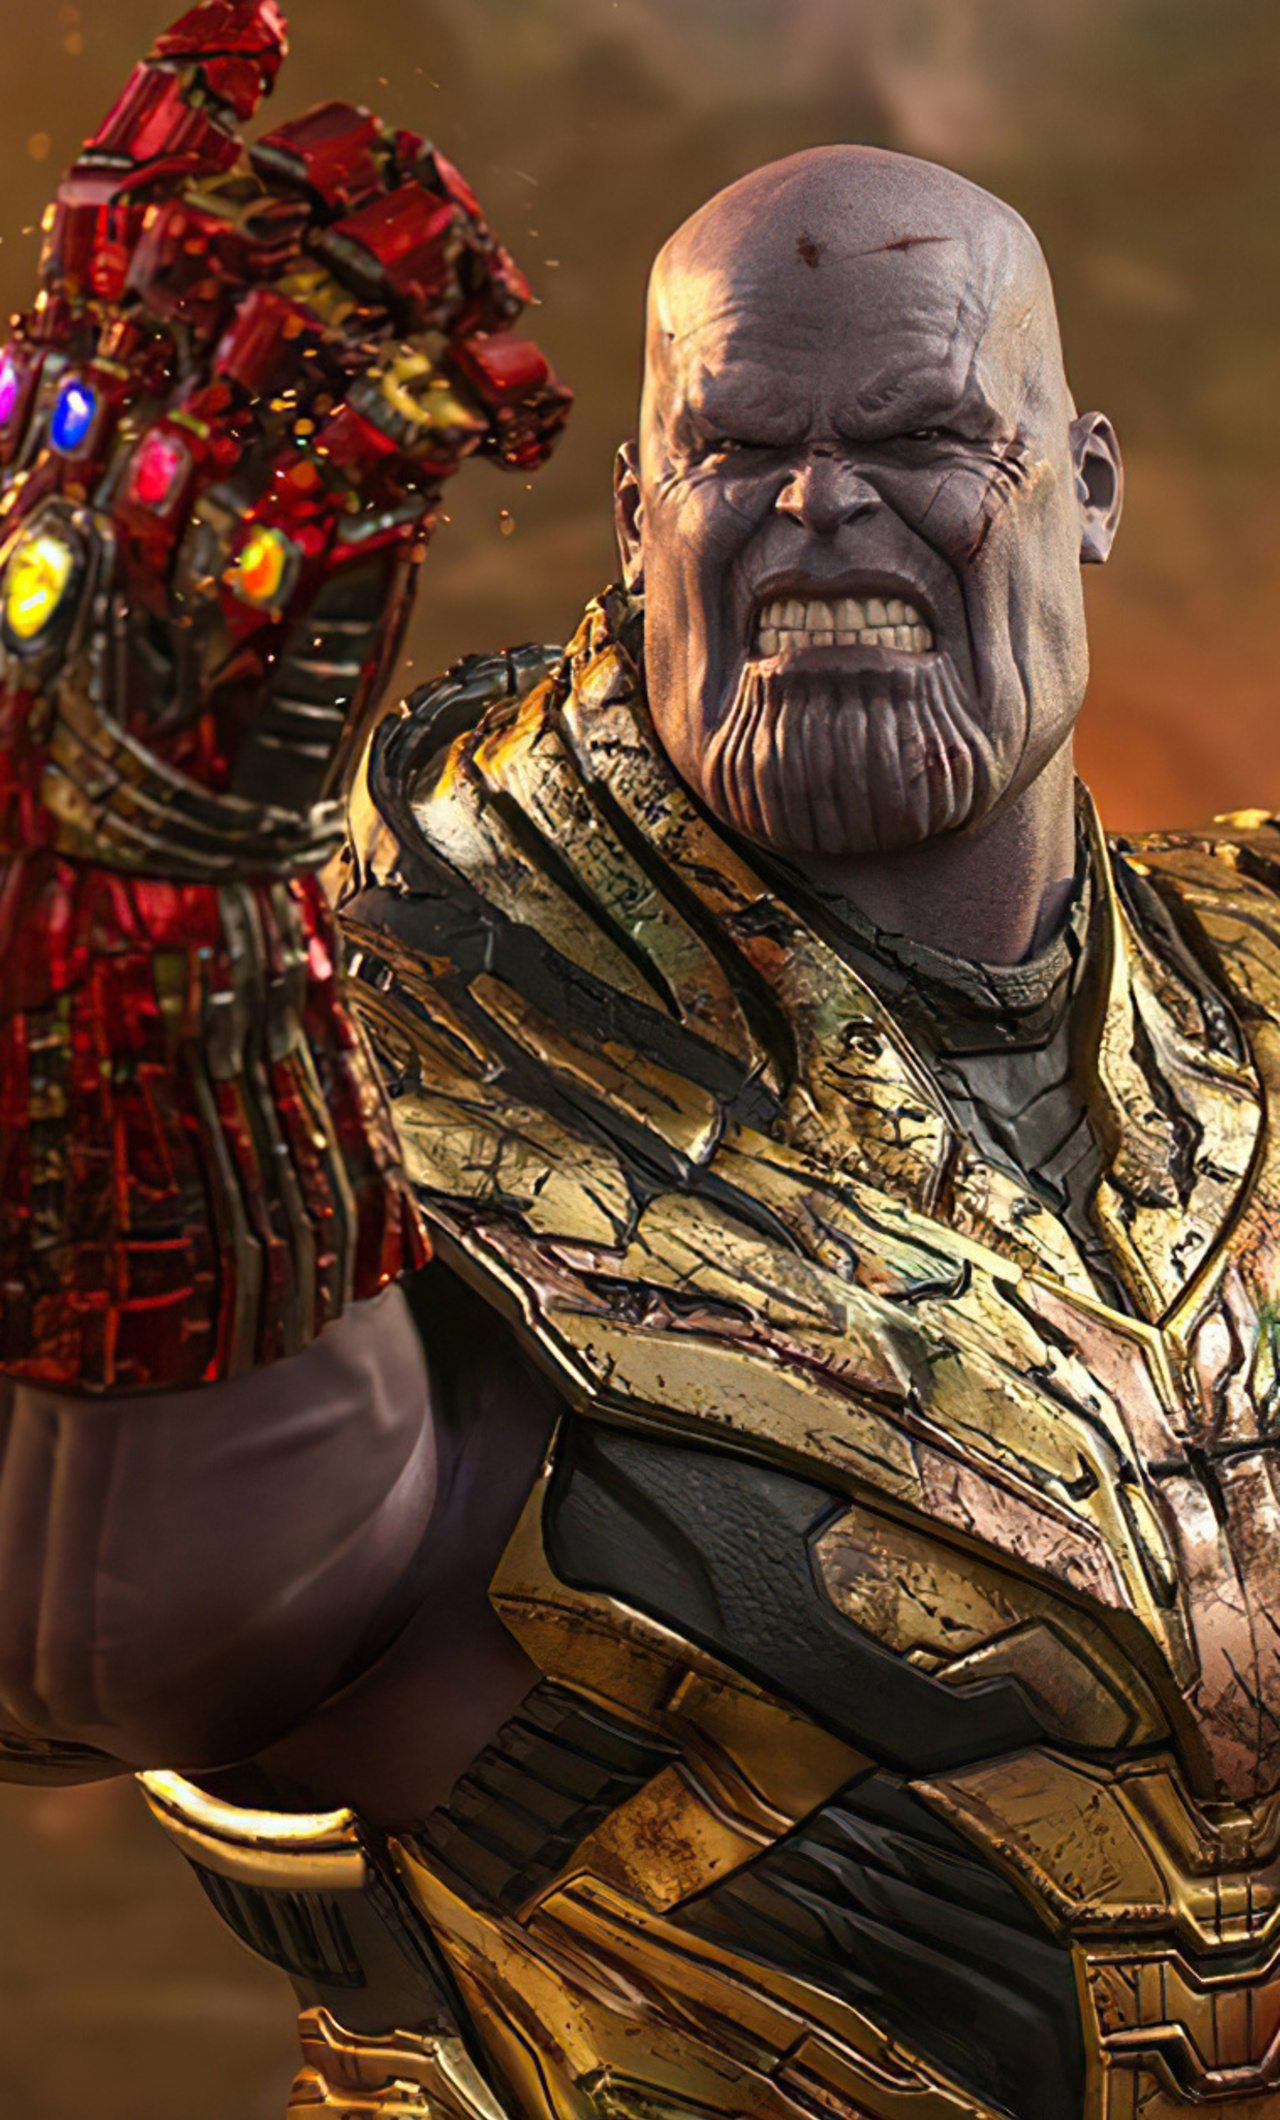 Thanos Iphone Wallpapers